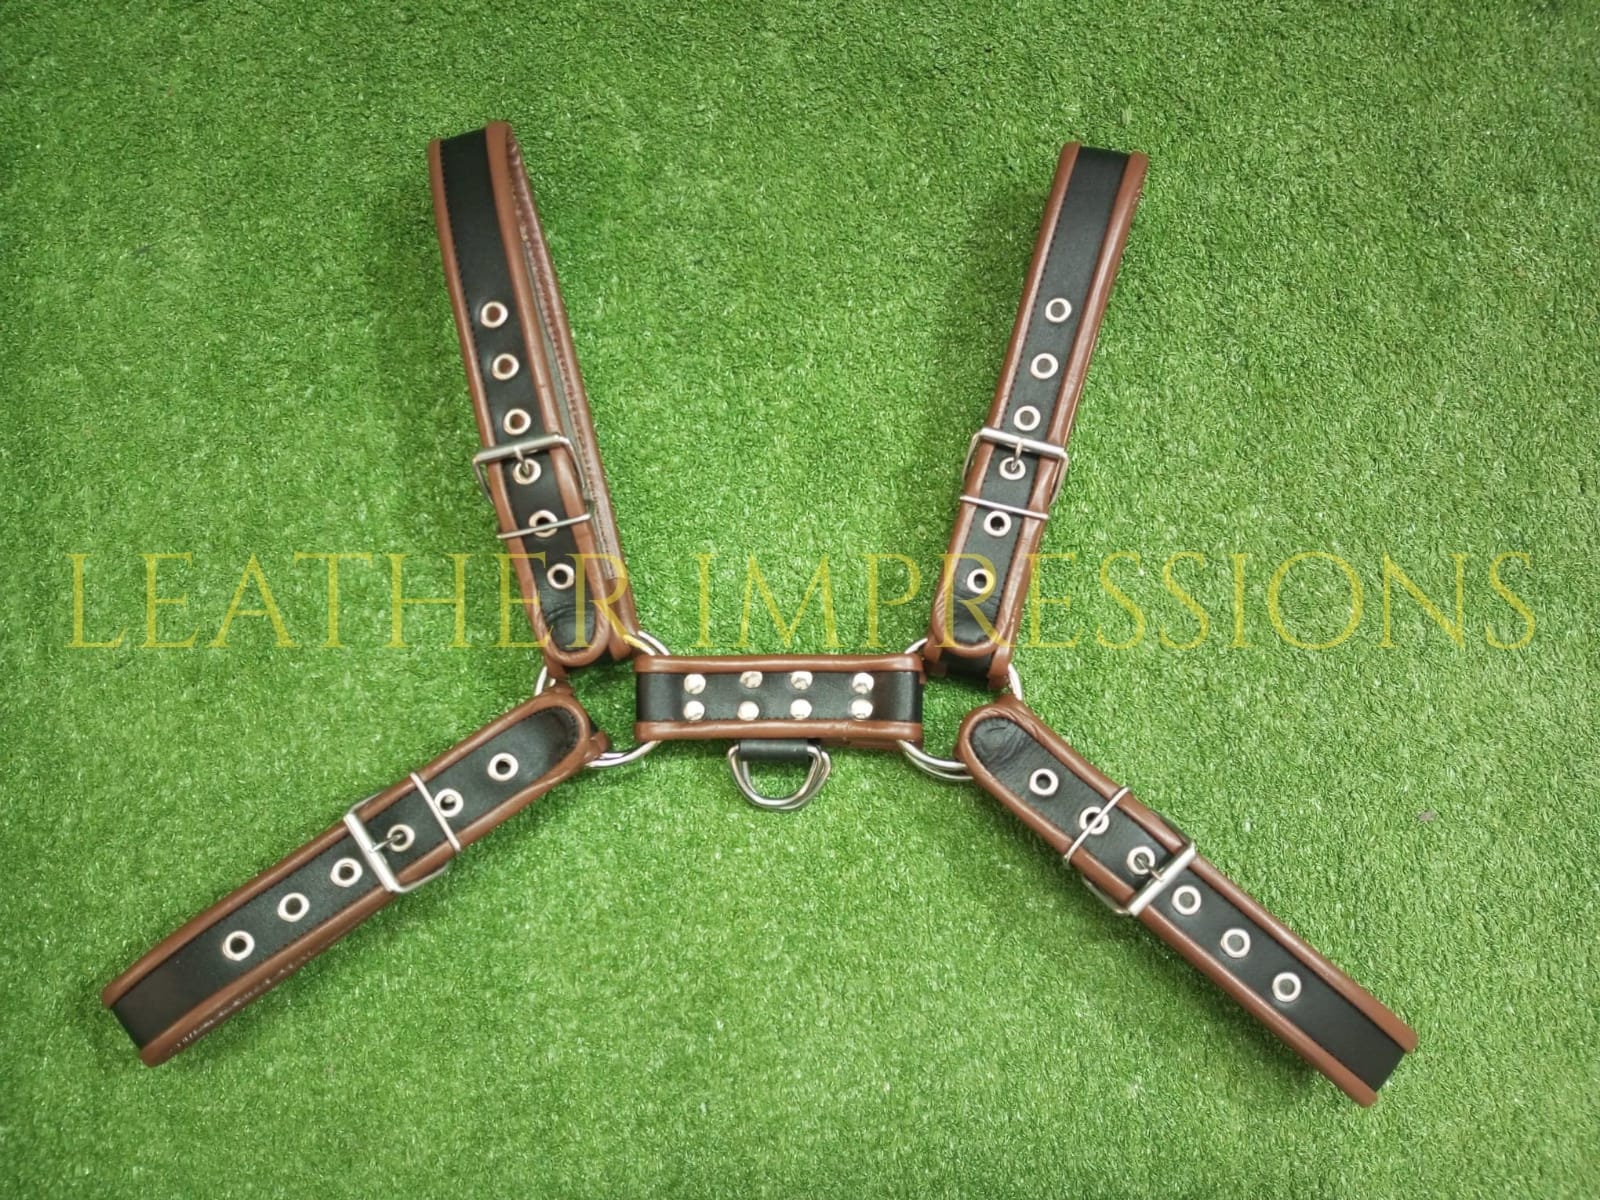 bondage leather h-harness, mens leather chest harness, Leather Bondage Harness